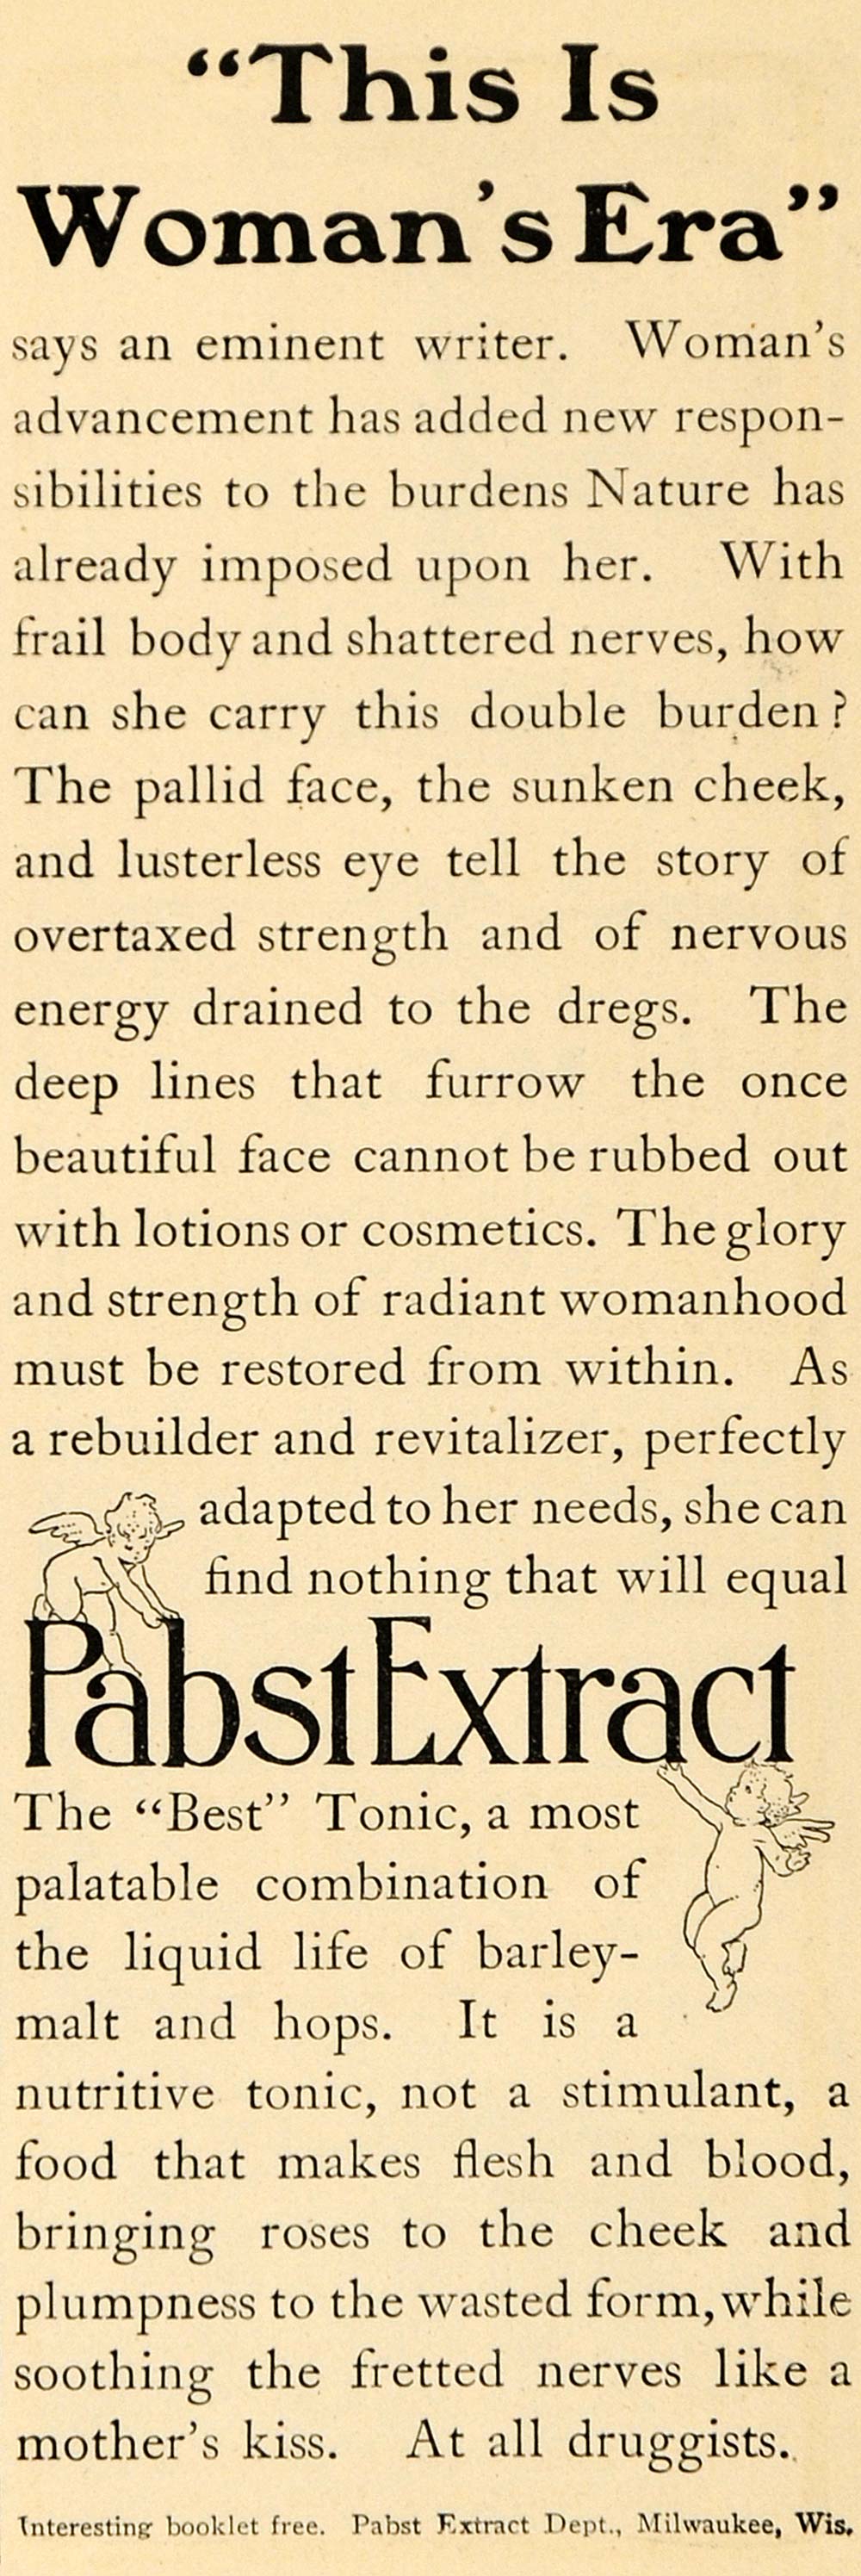 1904 Ad Pabst Extract Malt Tonic For Women's Health - ORIGINAL ADVERTISING GH2